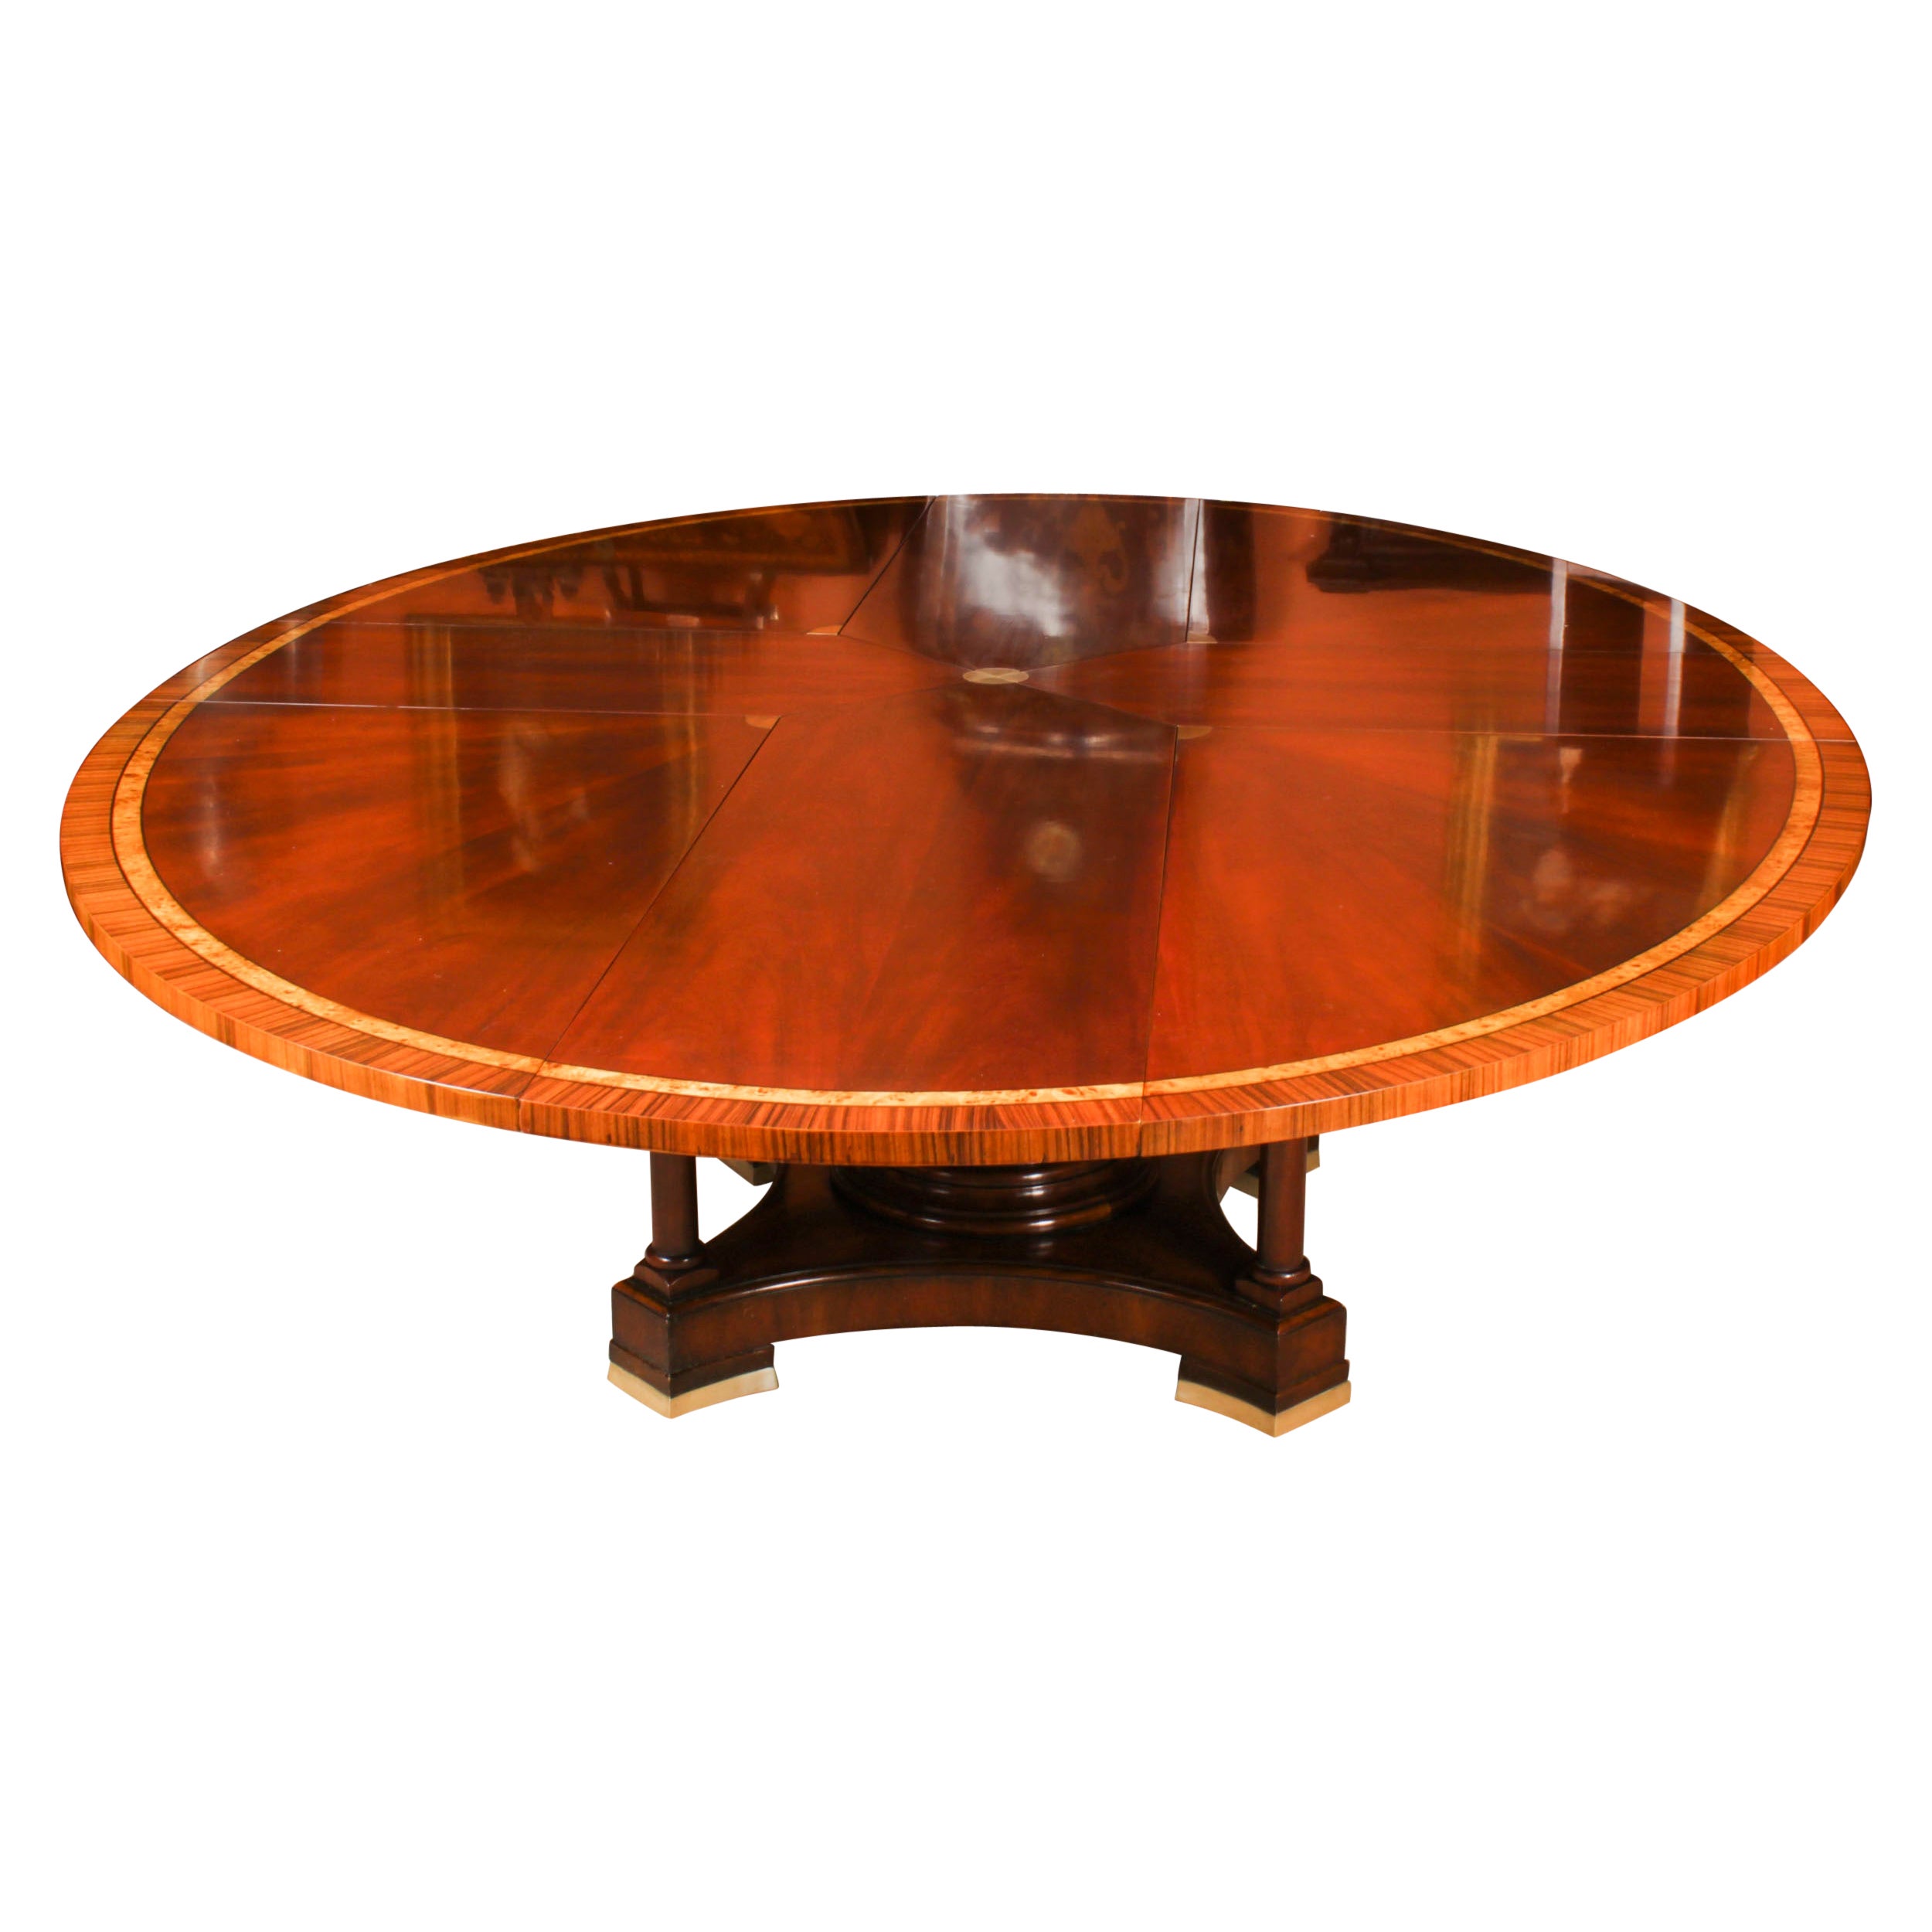 Vintage Large 9ft x 6ft3" Oval Flame Mahogany Jupe Dining Table 20th Century en vente